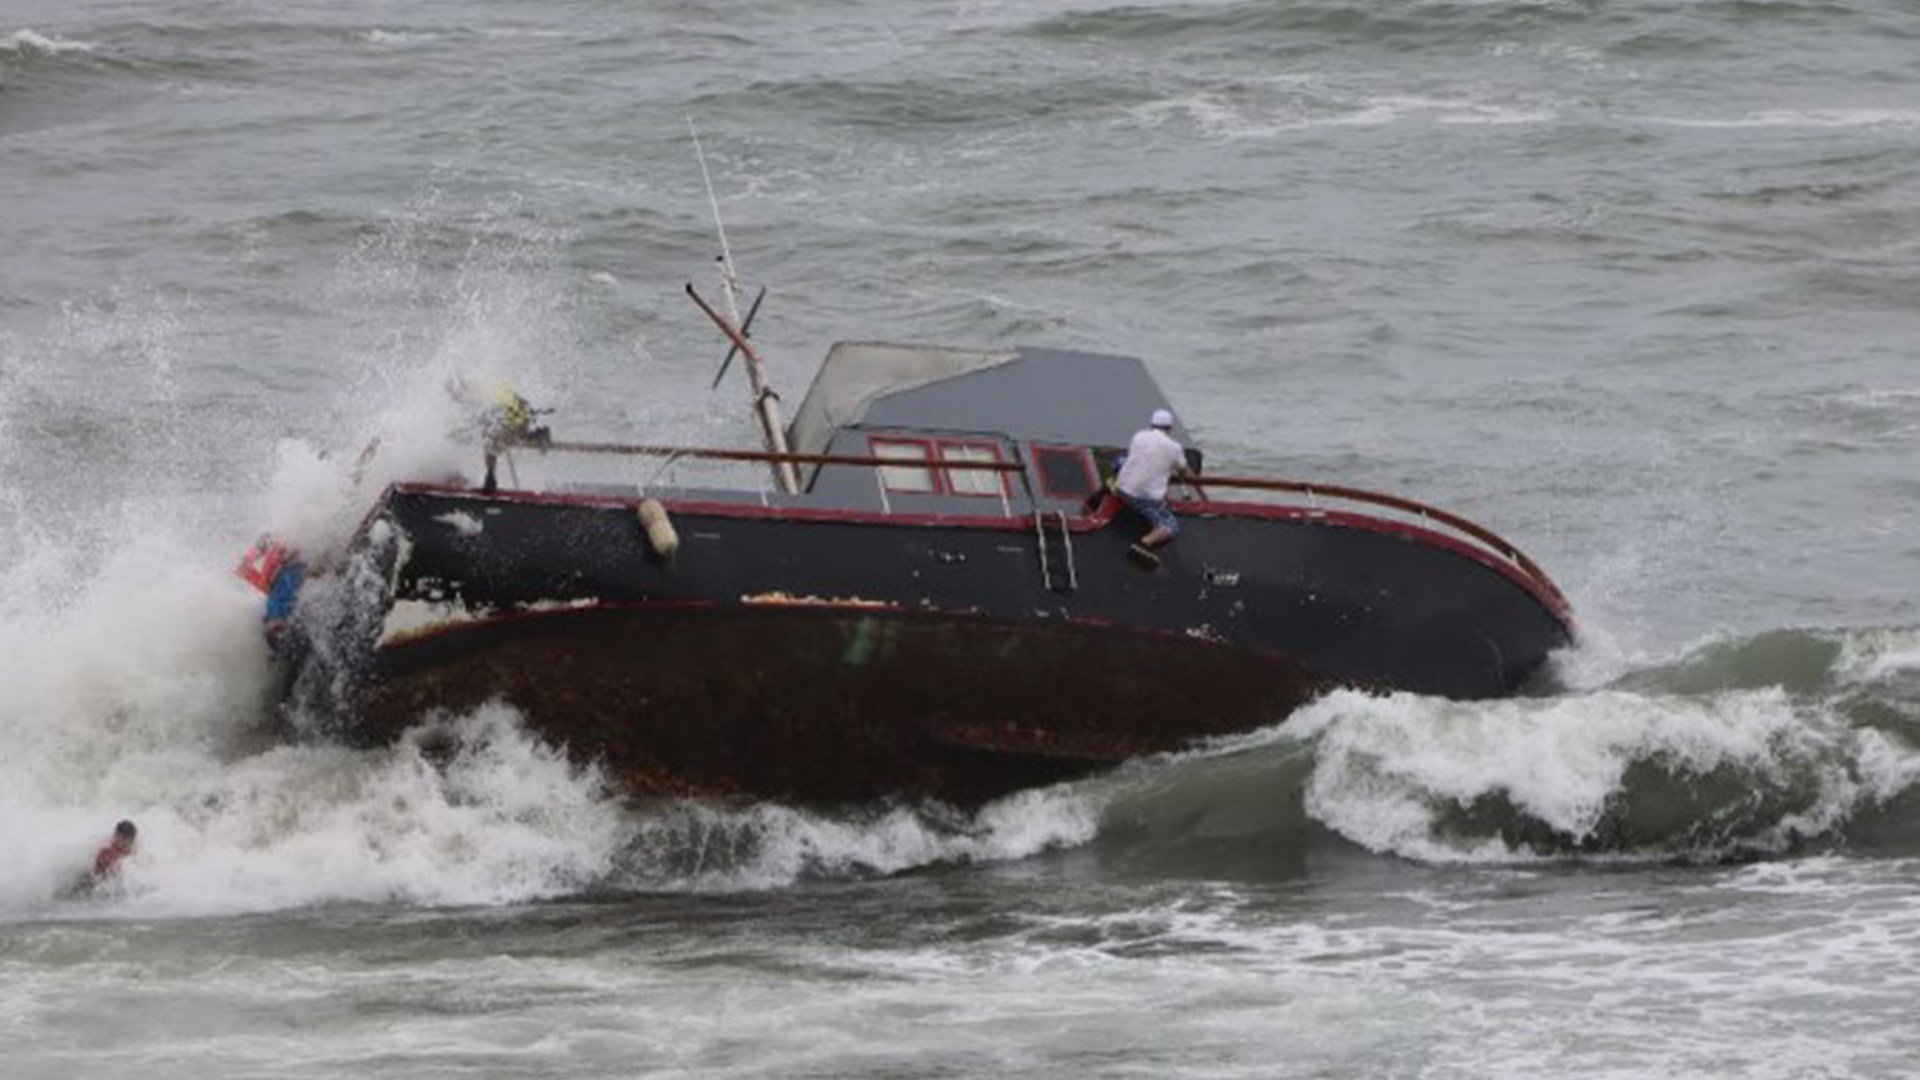 Undocumented migrants abandon the sinking Lucky Lady, a 40-foot fishing boat that wrecked on the reef off California's Point Loma on May 2, 2021. US Department of Justice photo.